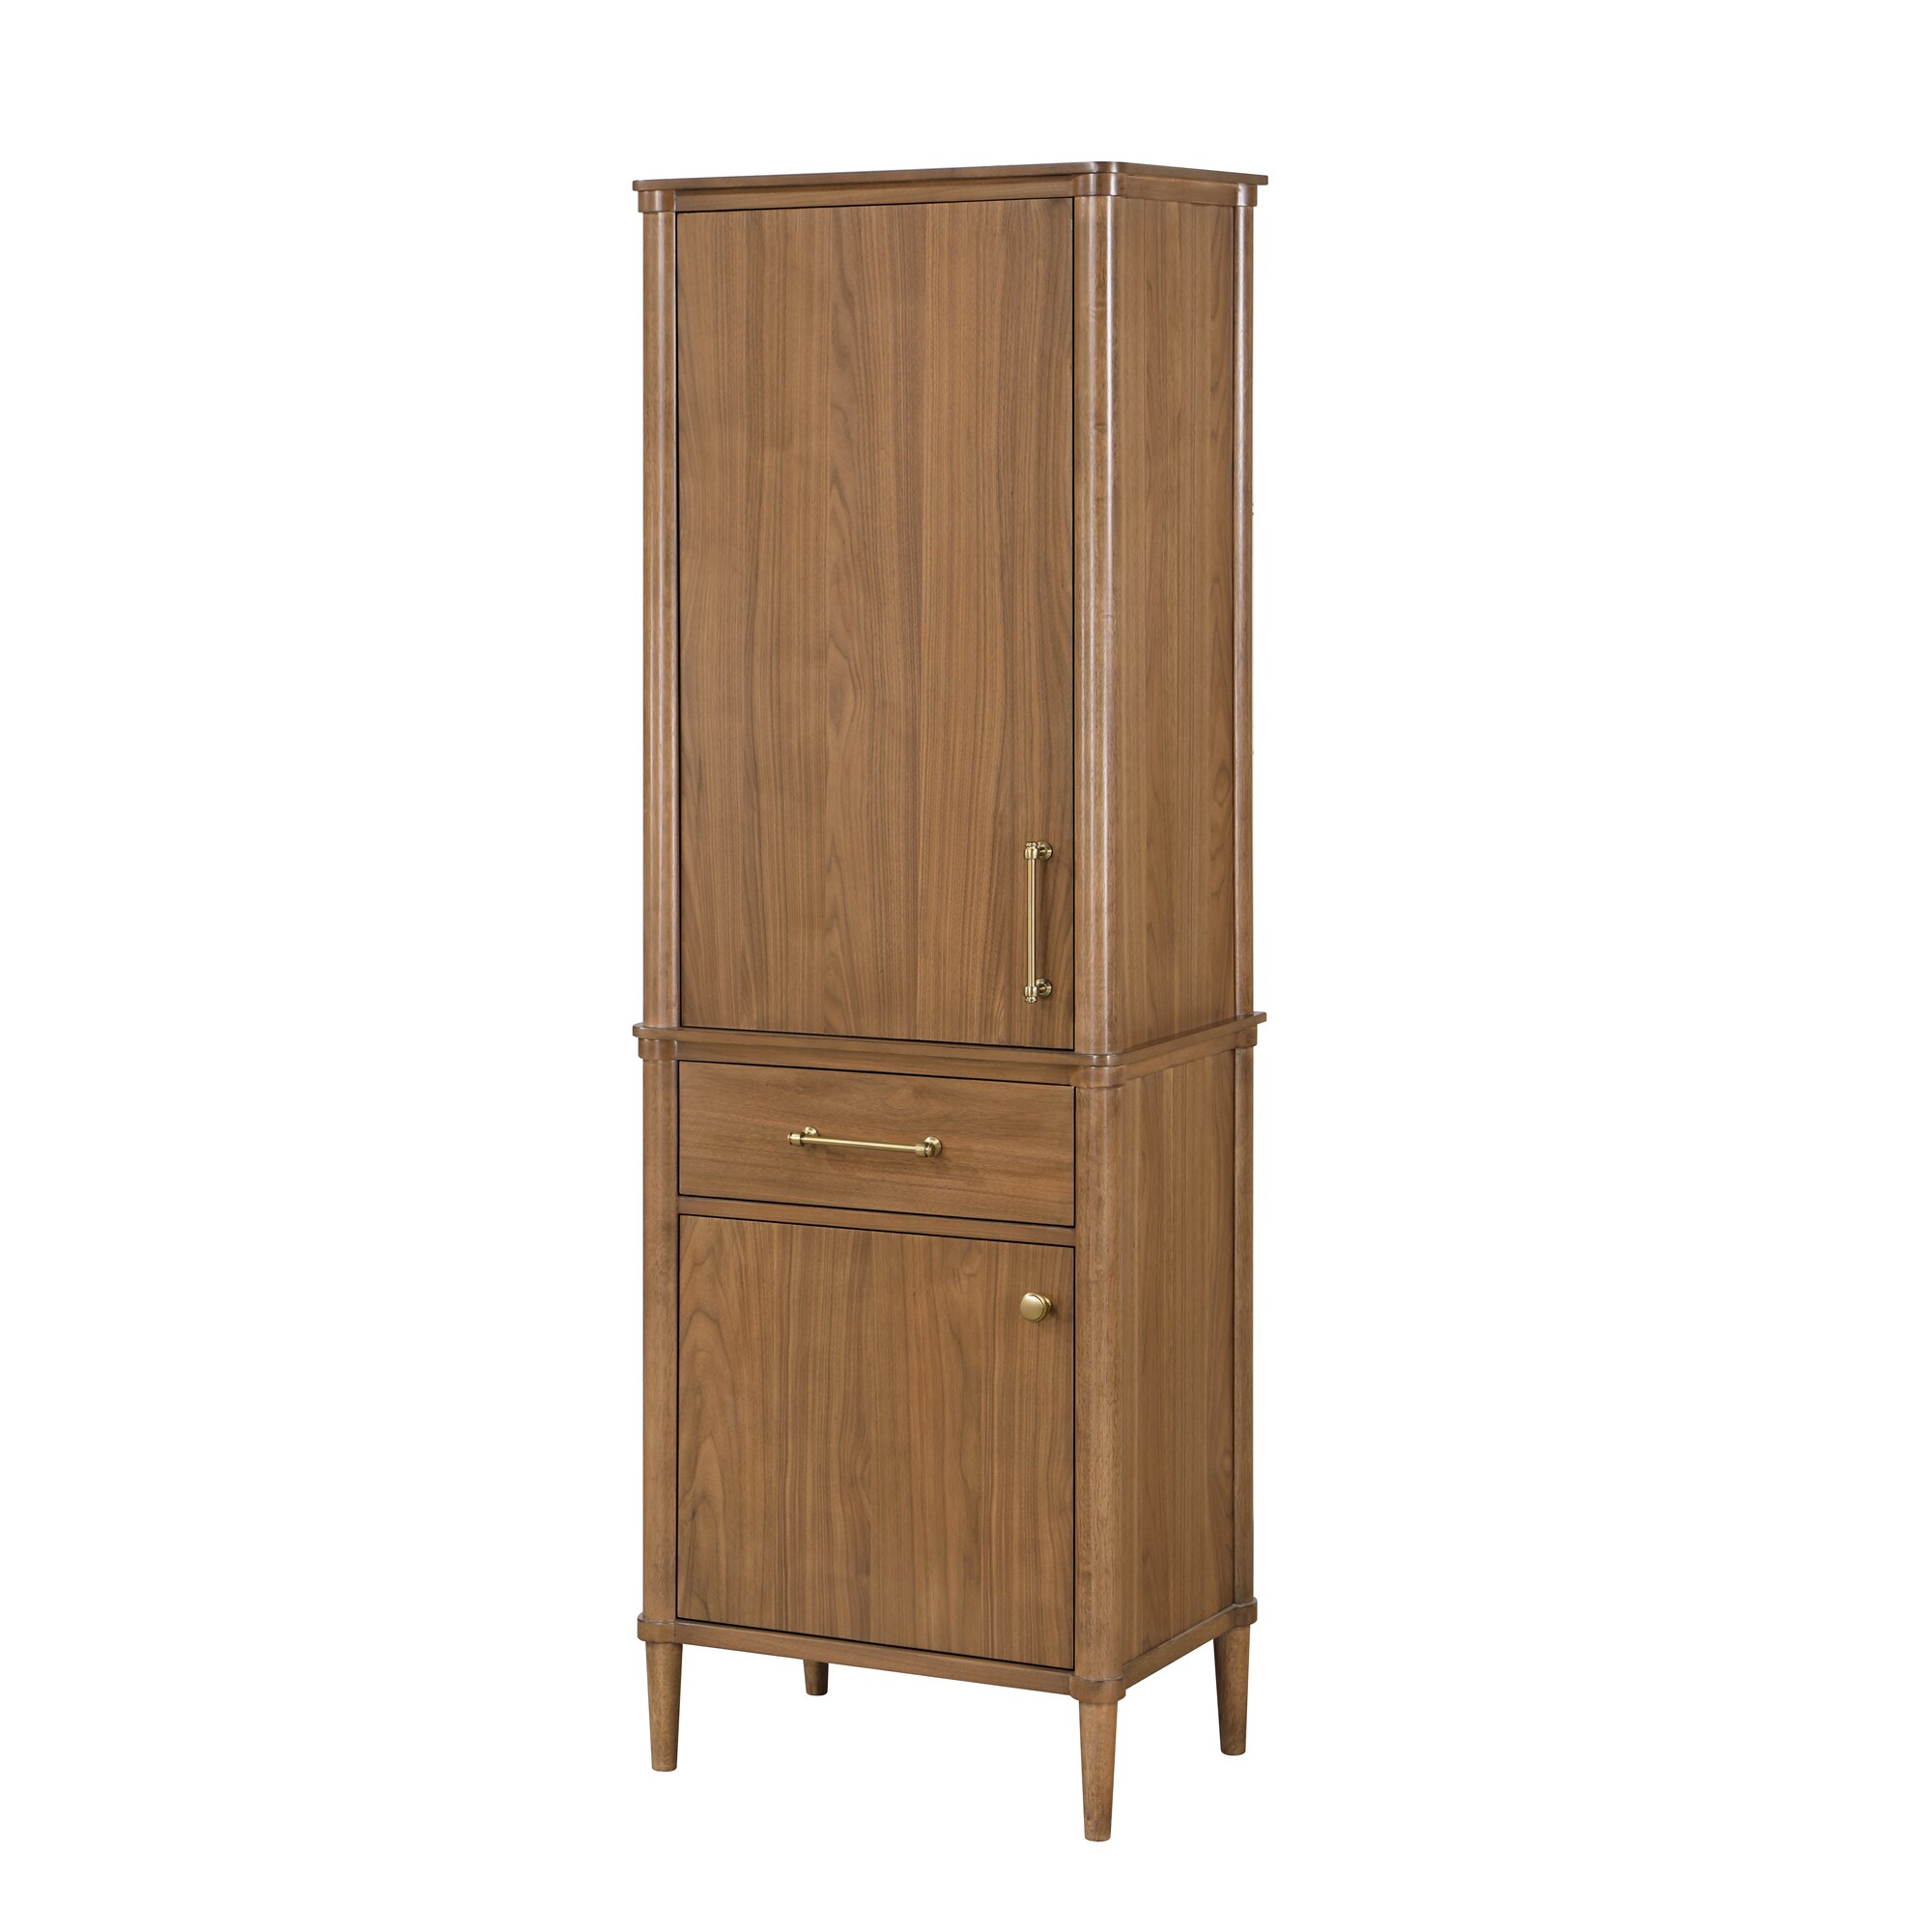 Linen Cabinet In The Cabinets